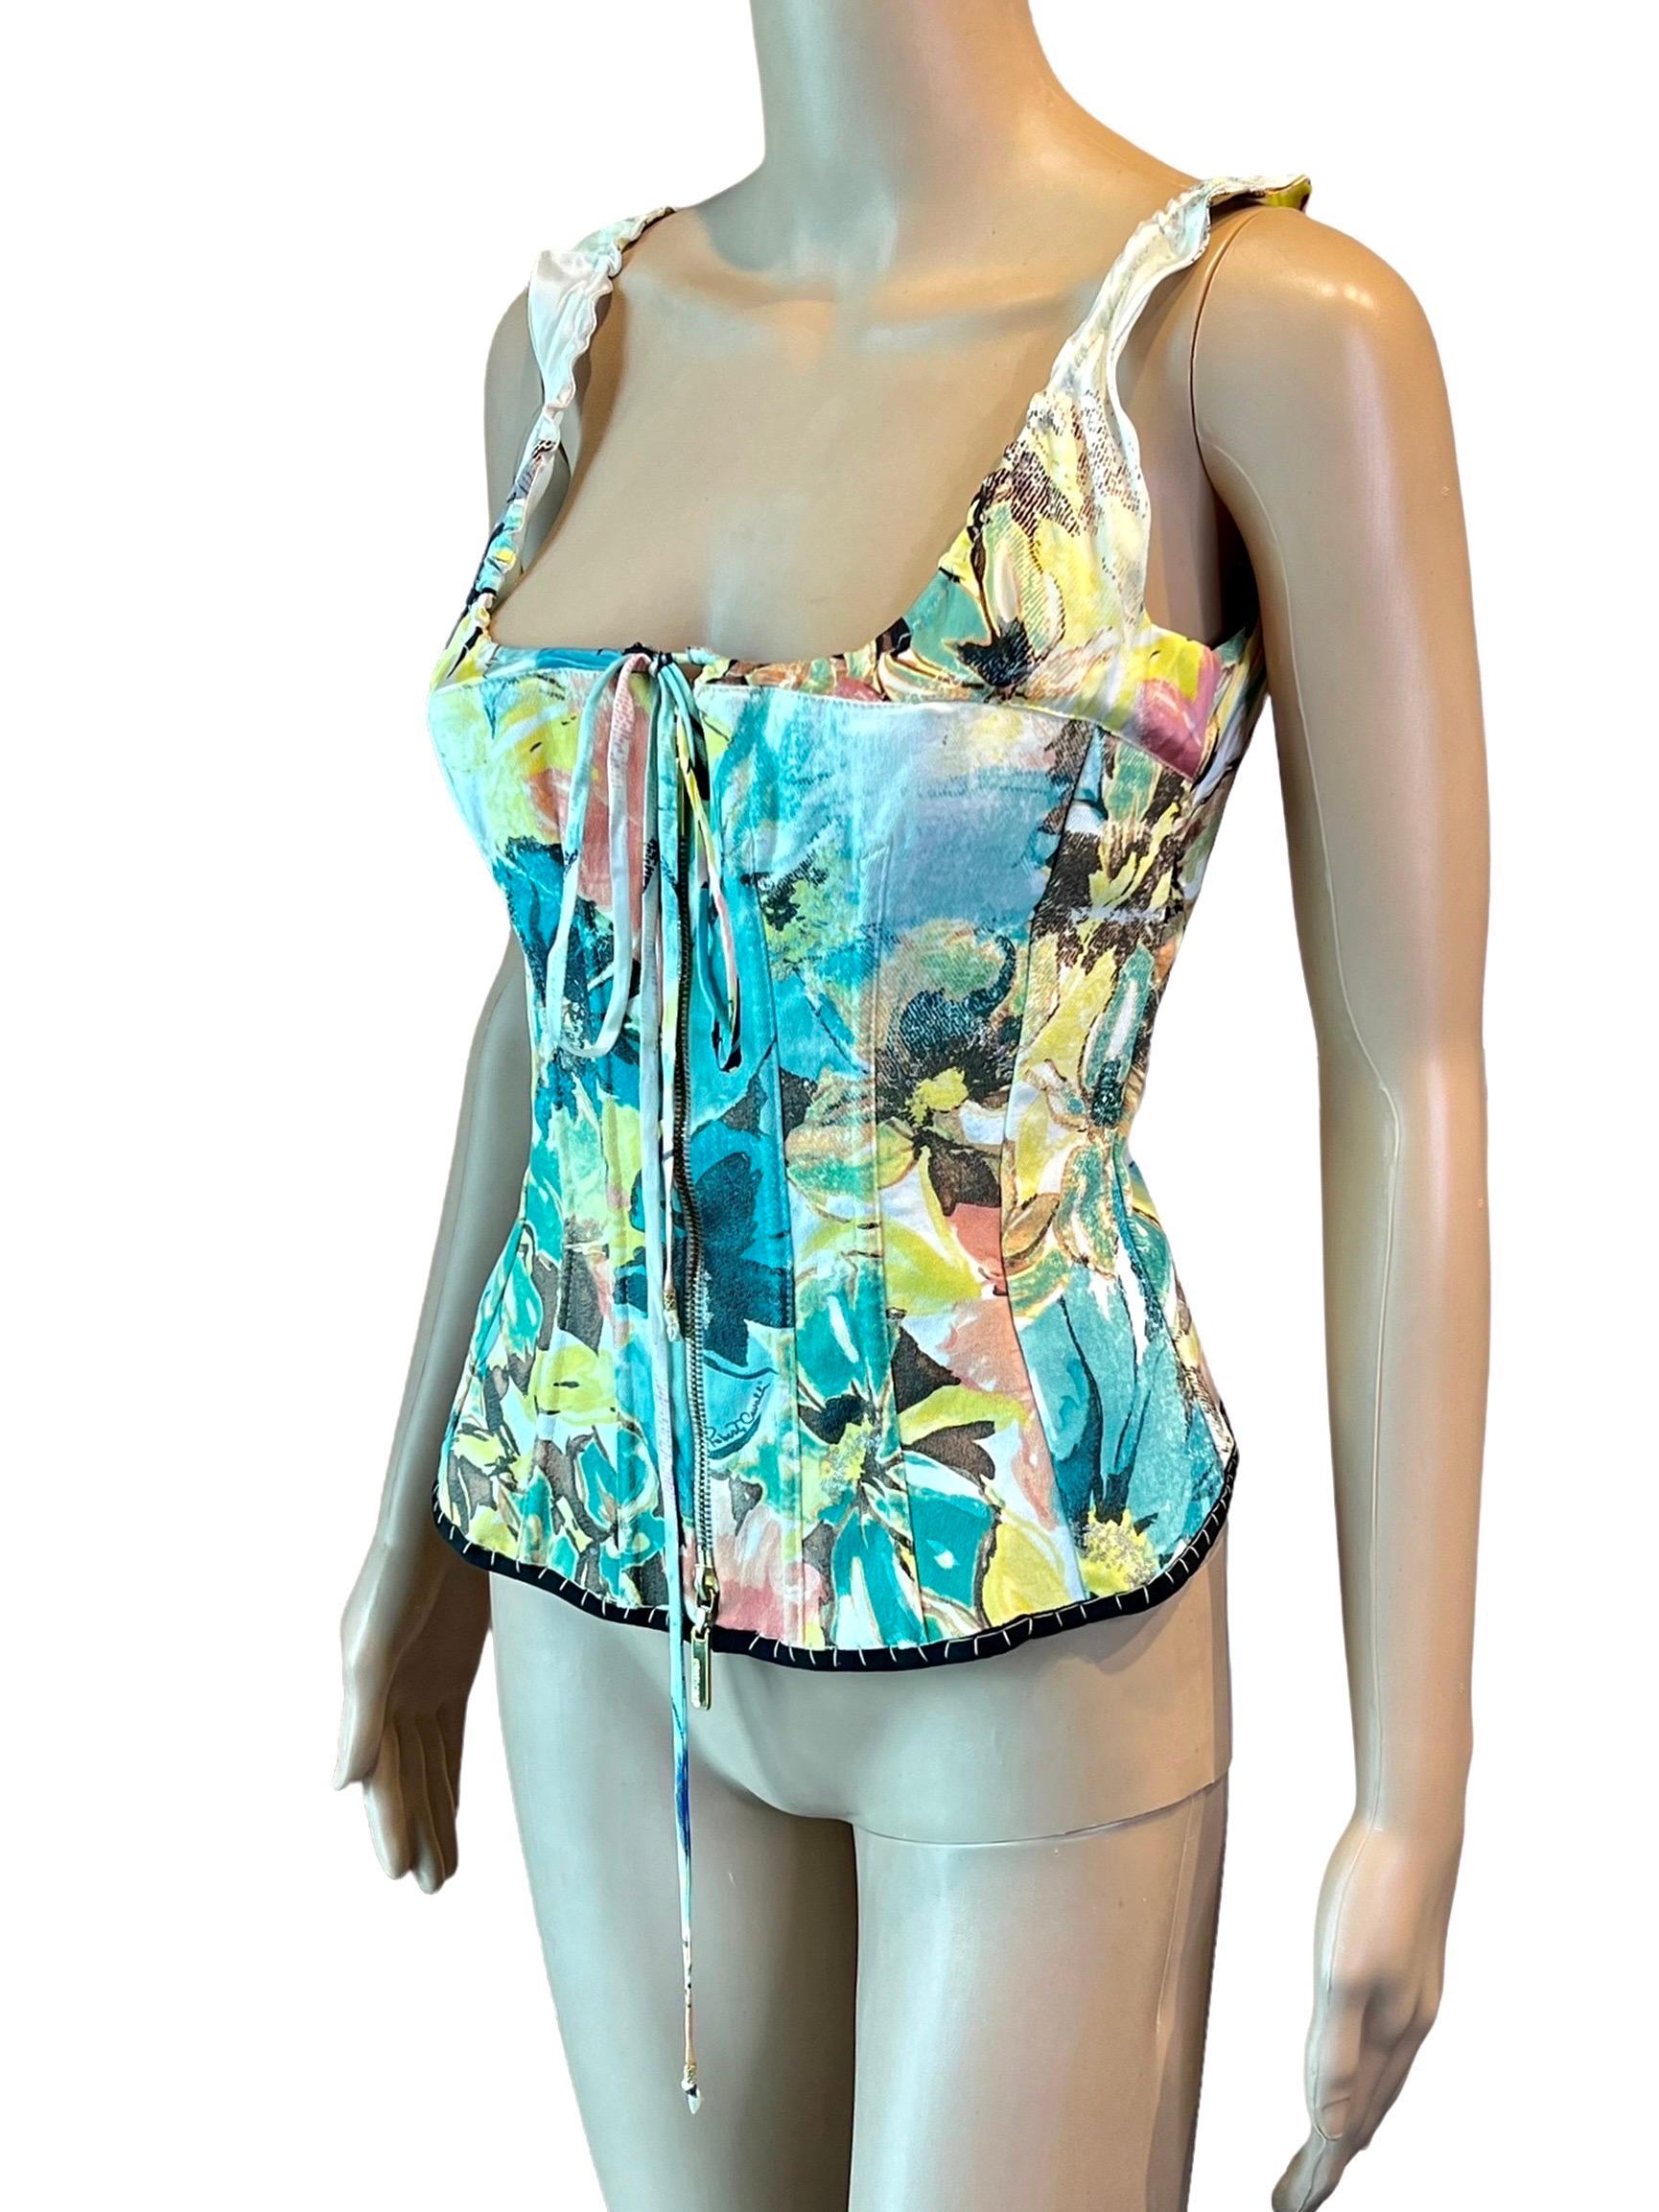 Roberto Cavalli S/S 2003 Bustier Corset Floral Abstract Print Denim Silk Top For Sale 2